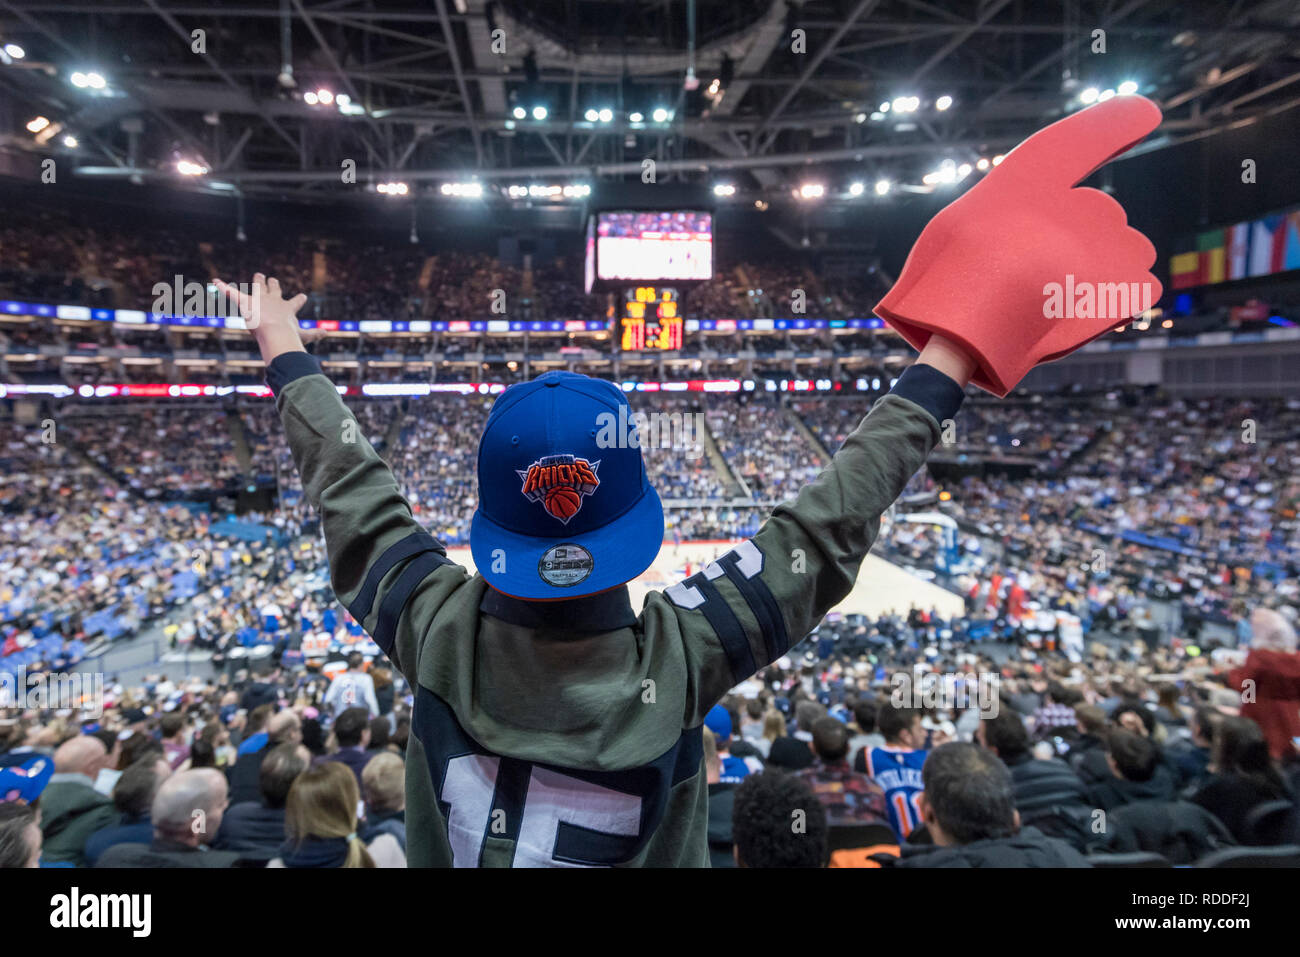 Londo , UK.  17 January 2019. A young Knicks fan celebrates during an NBA basketball game, NBA London 2019, between Washington Wizards and New York Knicks at the O2 Arena.  Final score: Wizards 101 Knicks 100.  Credit: Stephen Chung / Alamy Live News Stock Photo